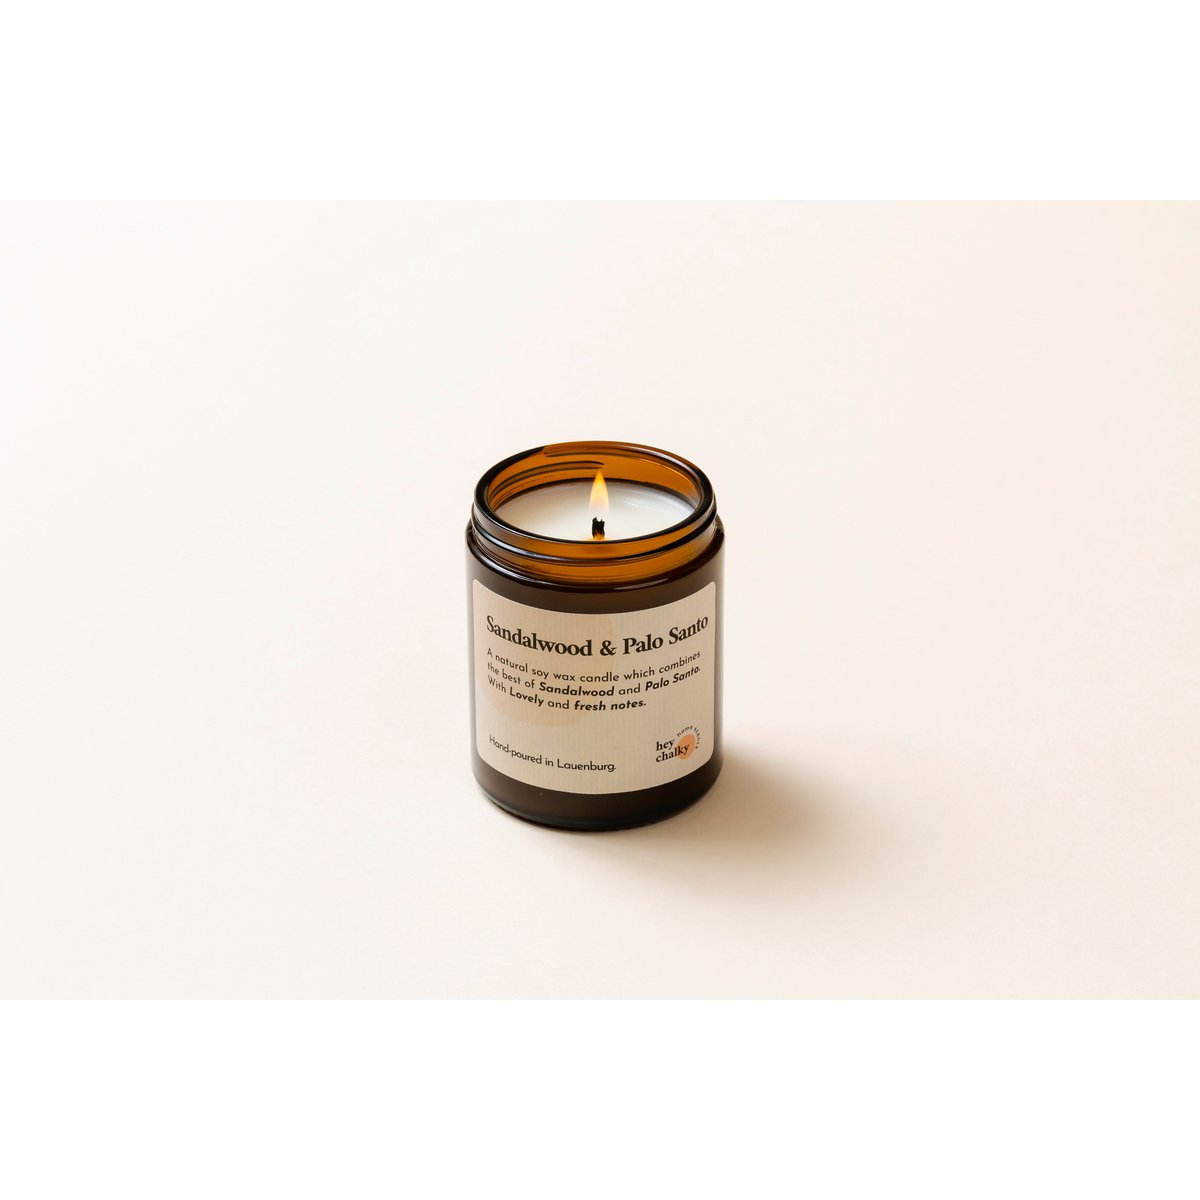 Candle "Sandalwood & Palo Santo" 155 g - scented candle in a glass